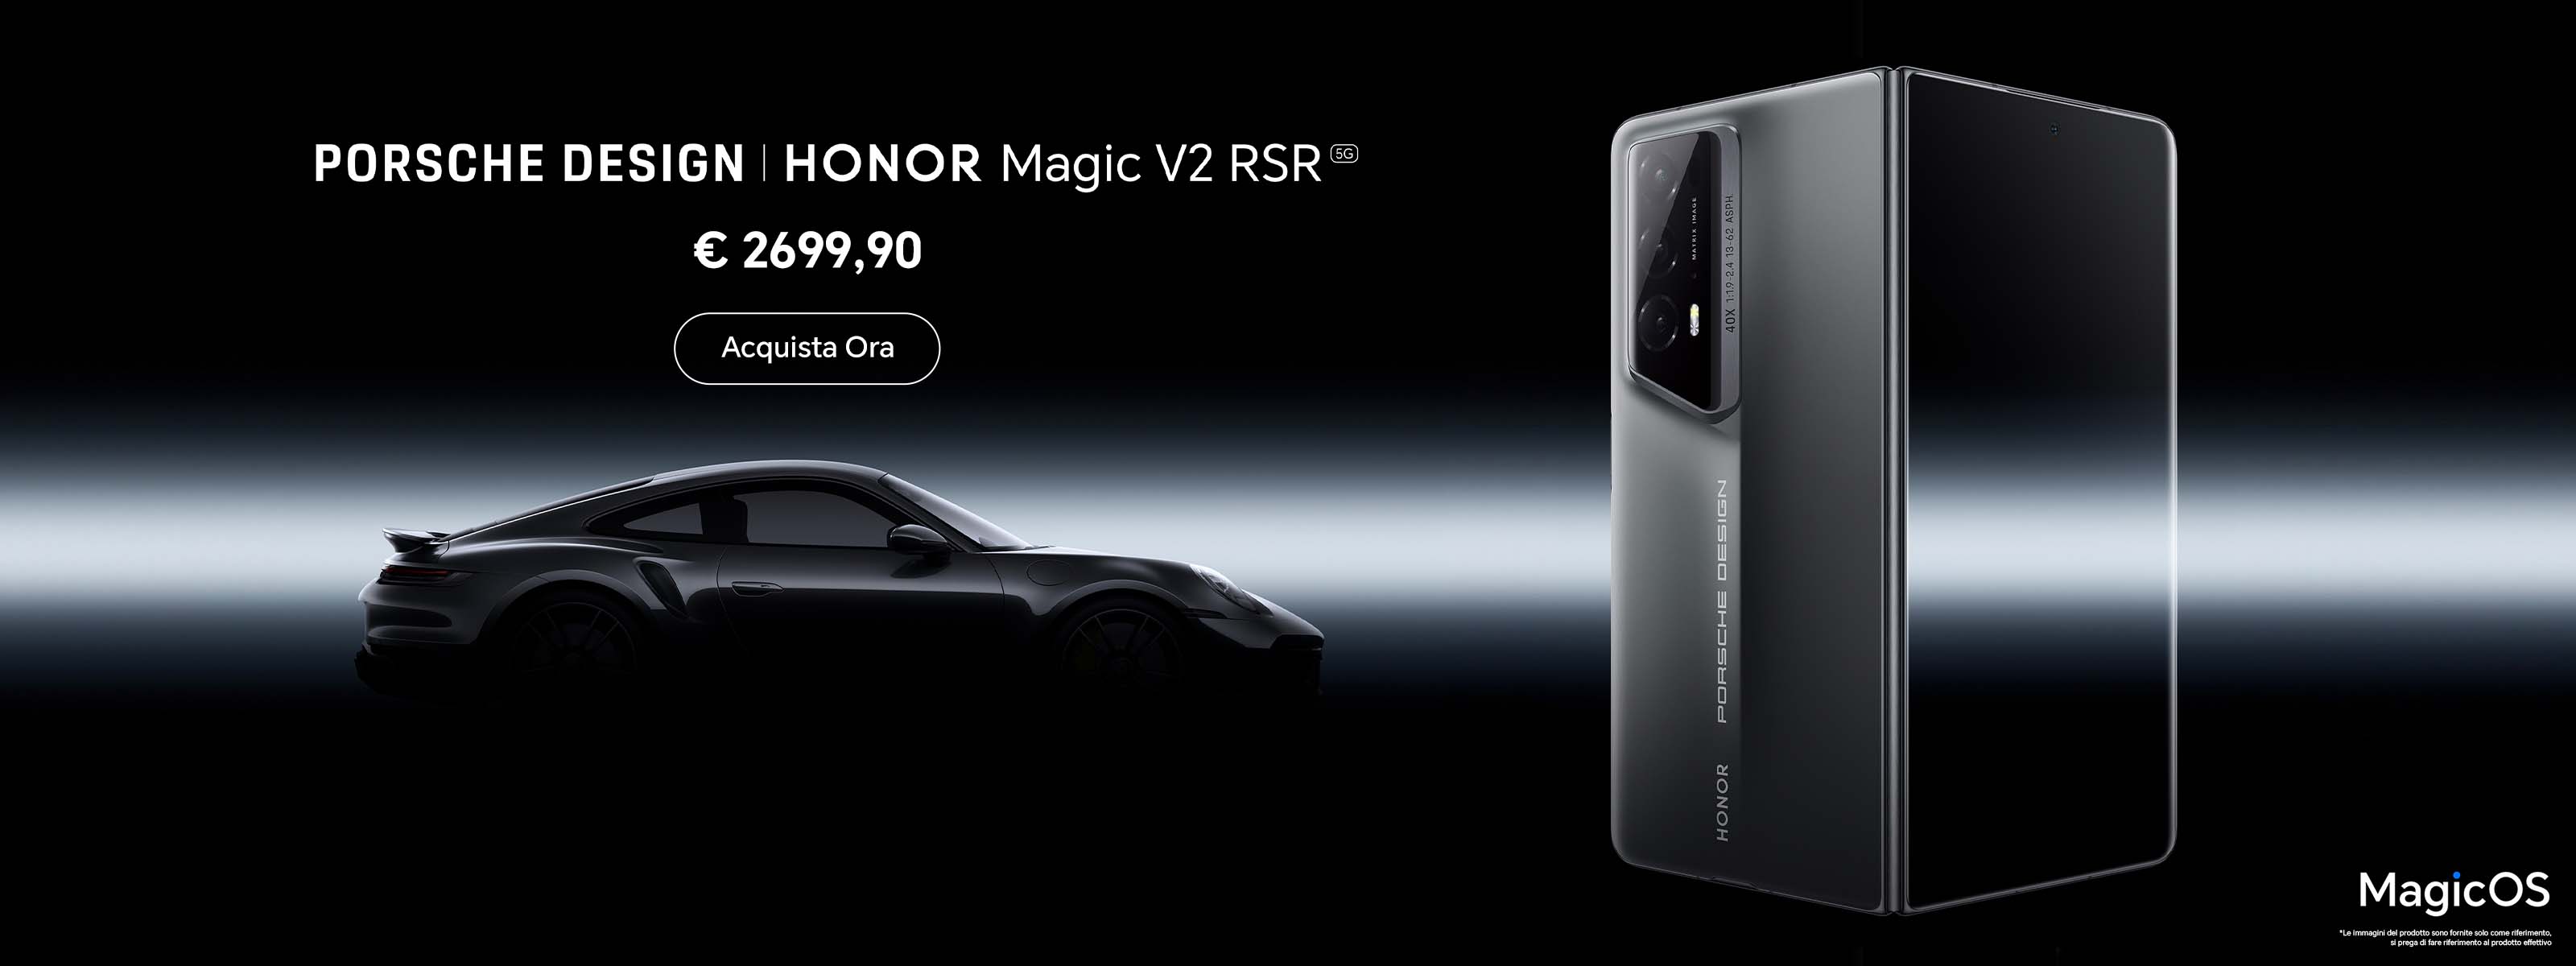 HONOR Magic V2 RSR: now available in Italy